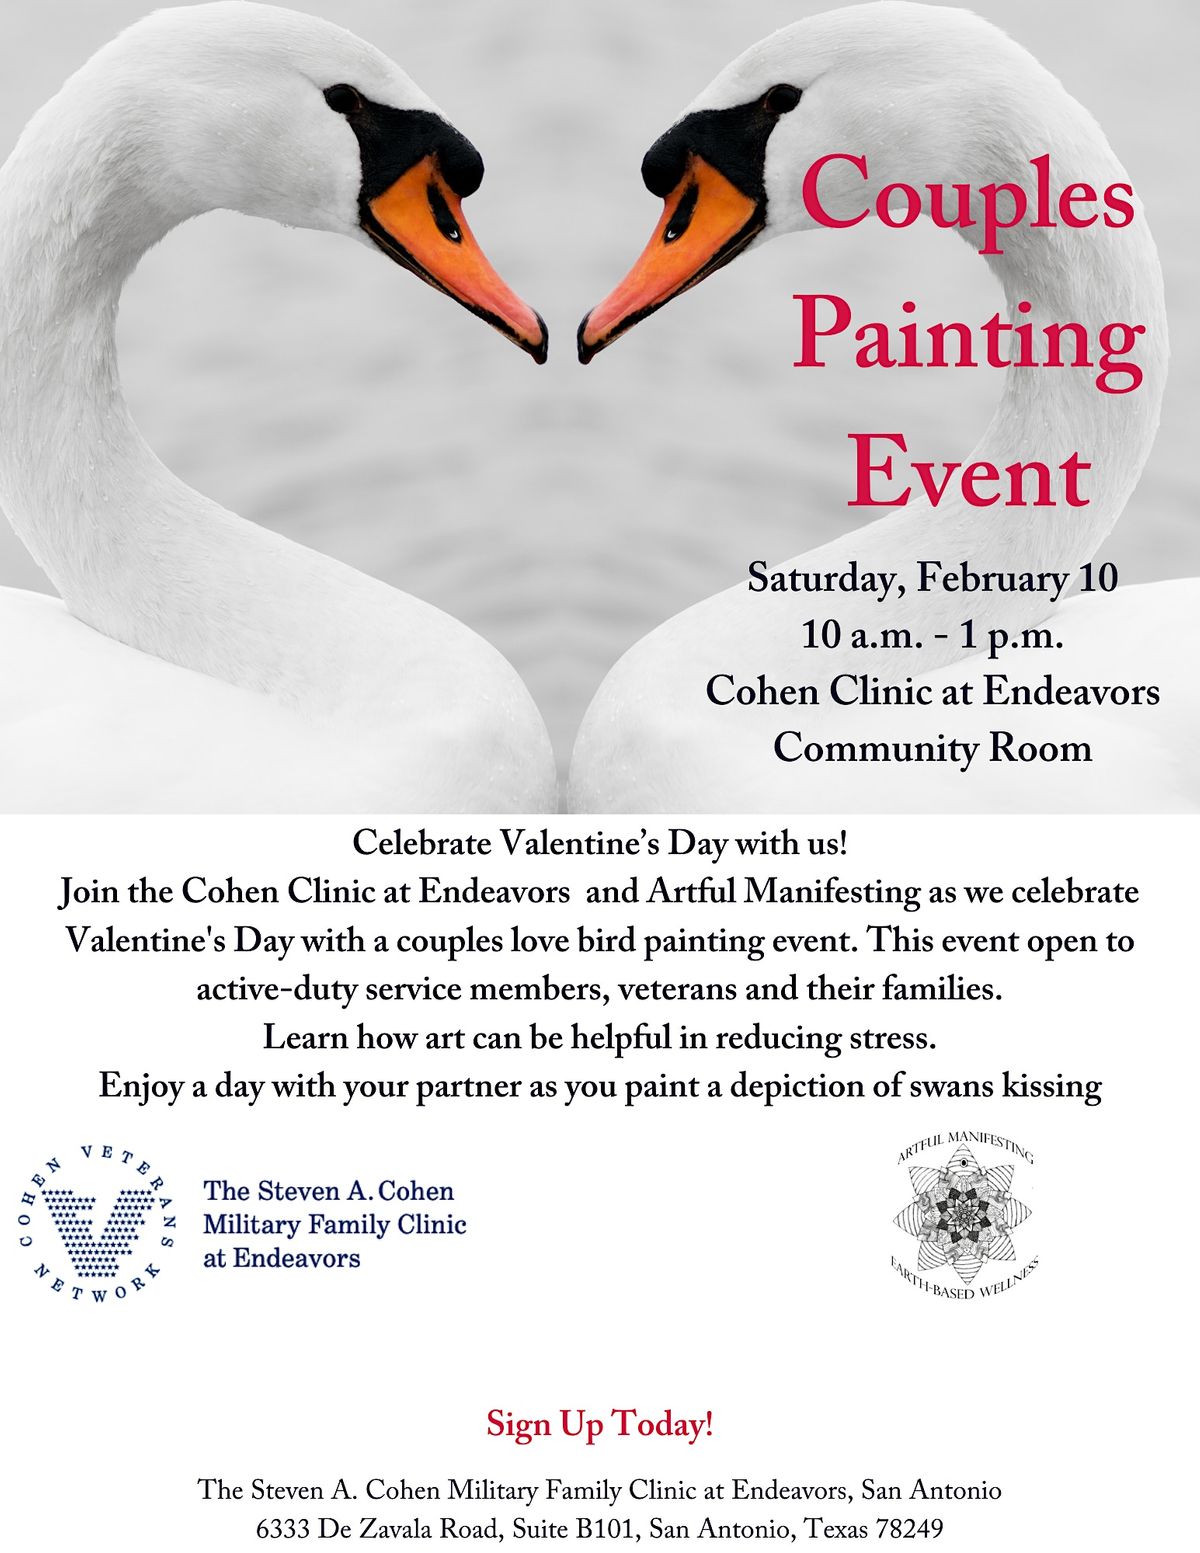 Couples Painting Event